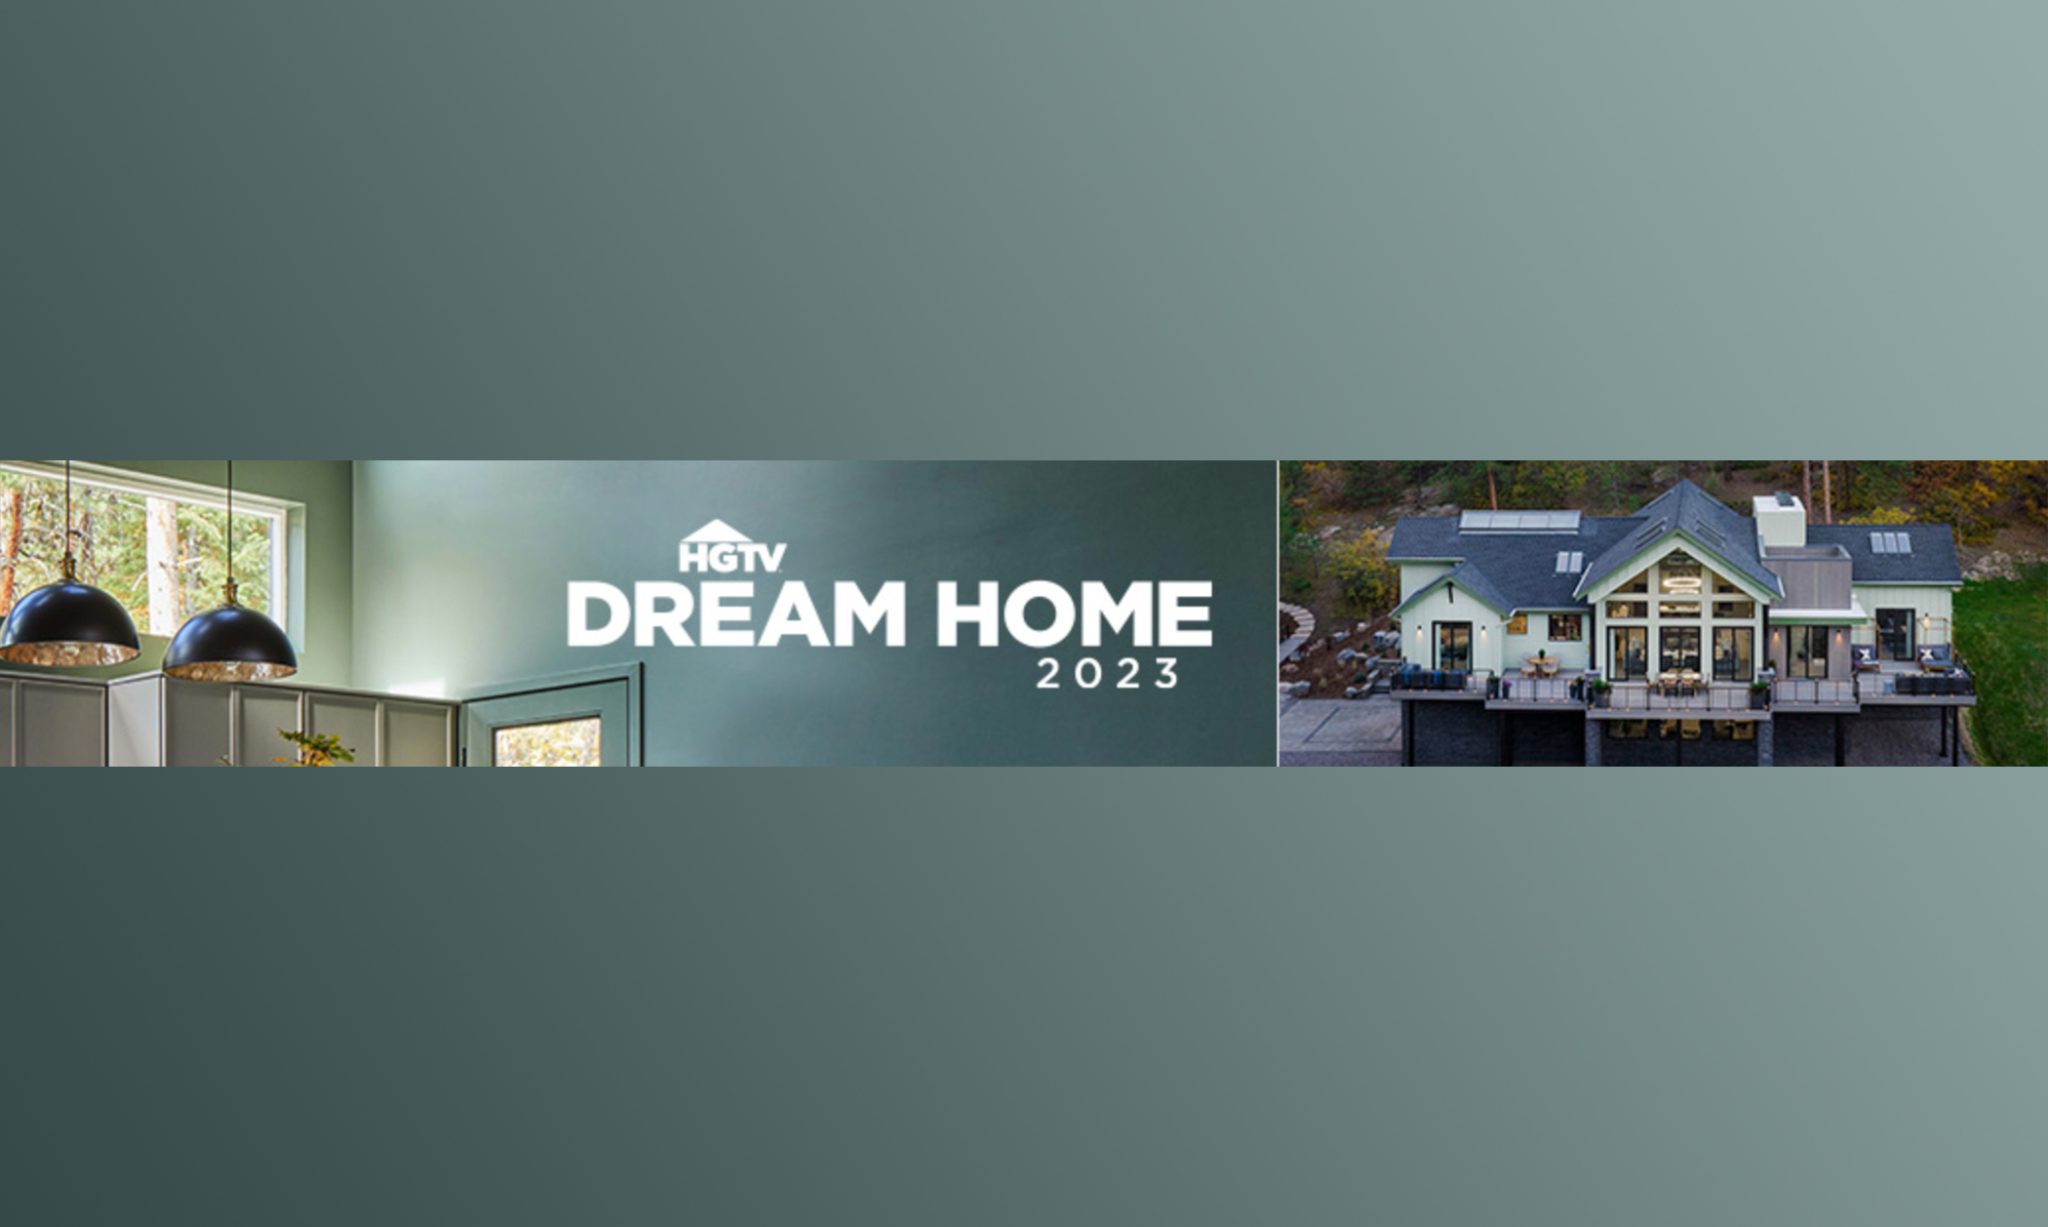 Enter to Win the HGTV Dream Home 2023! OKWow Sweepstakes and Giveaways